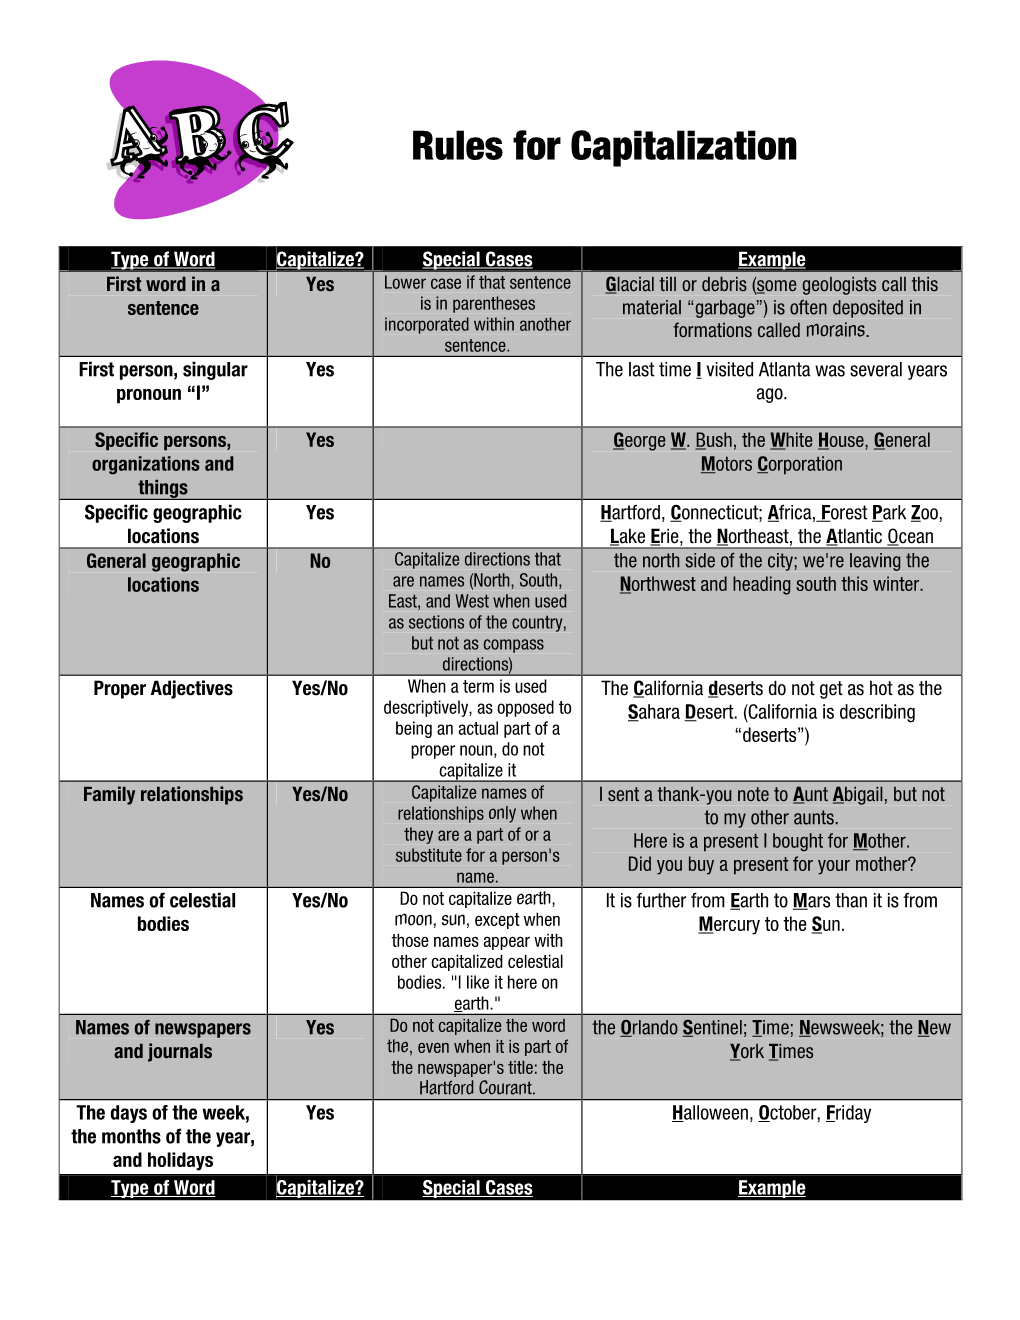 Rules for Capitalization Tipsheet